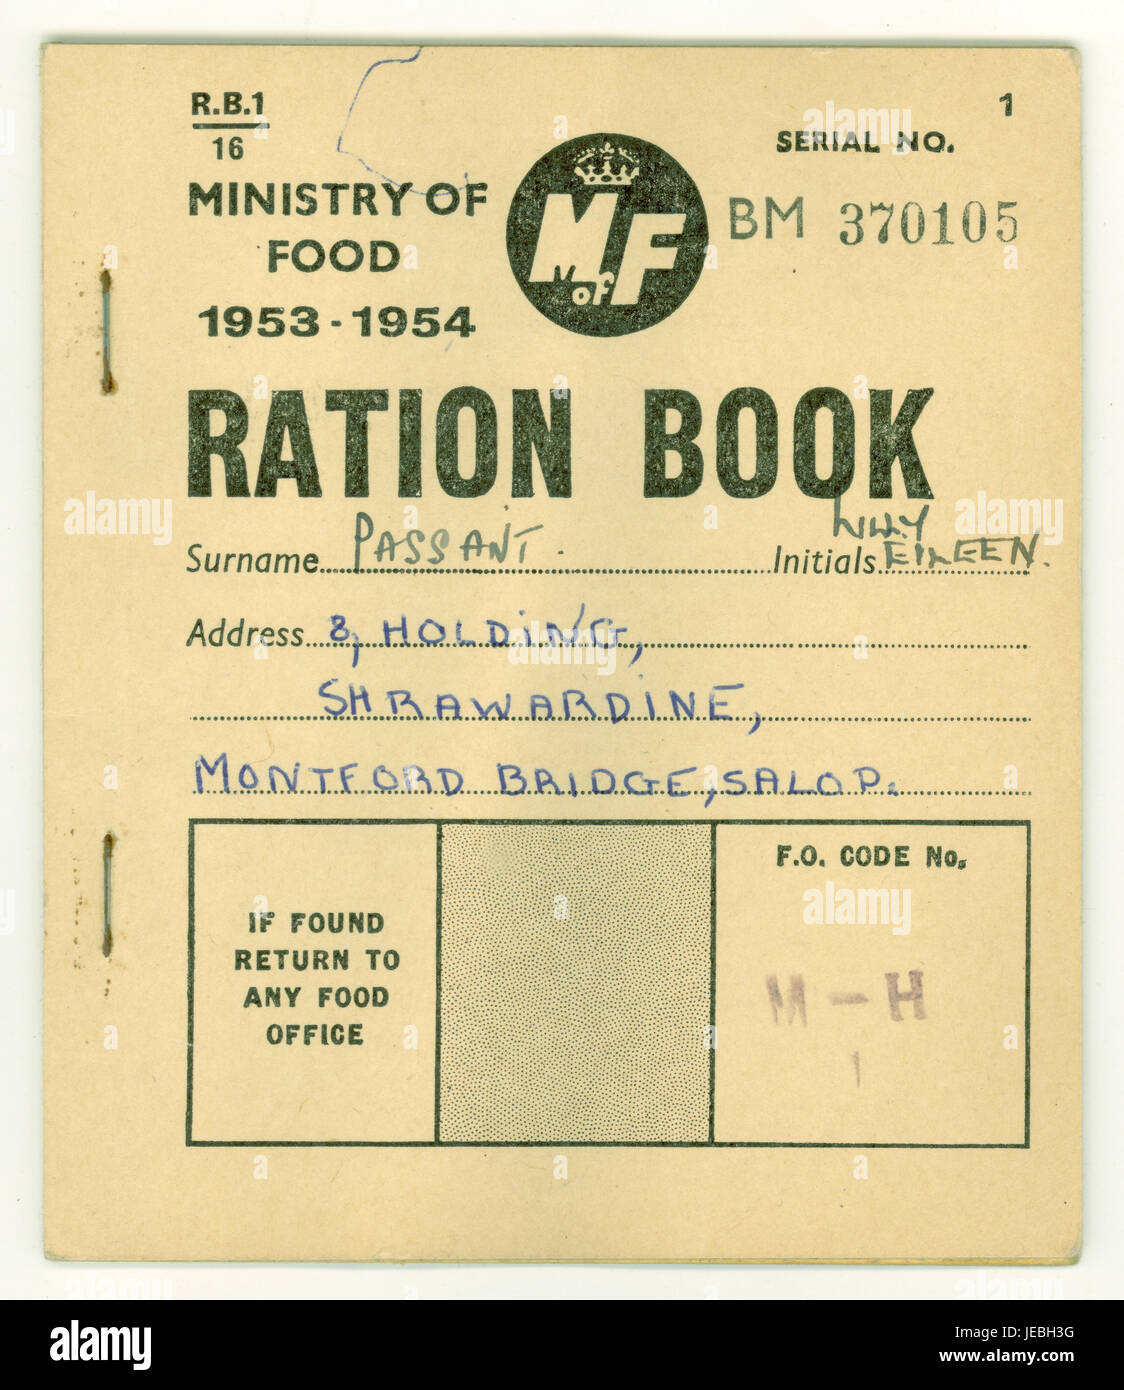 Ministry of Food 1953-1954 Ration Book, coupons inside, a restriction which affected the British people's diet, for a resident of Montford Bridge, Salop, (old abbreviated name for Shropshire), England, U.K. Stock Photo